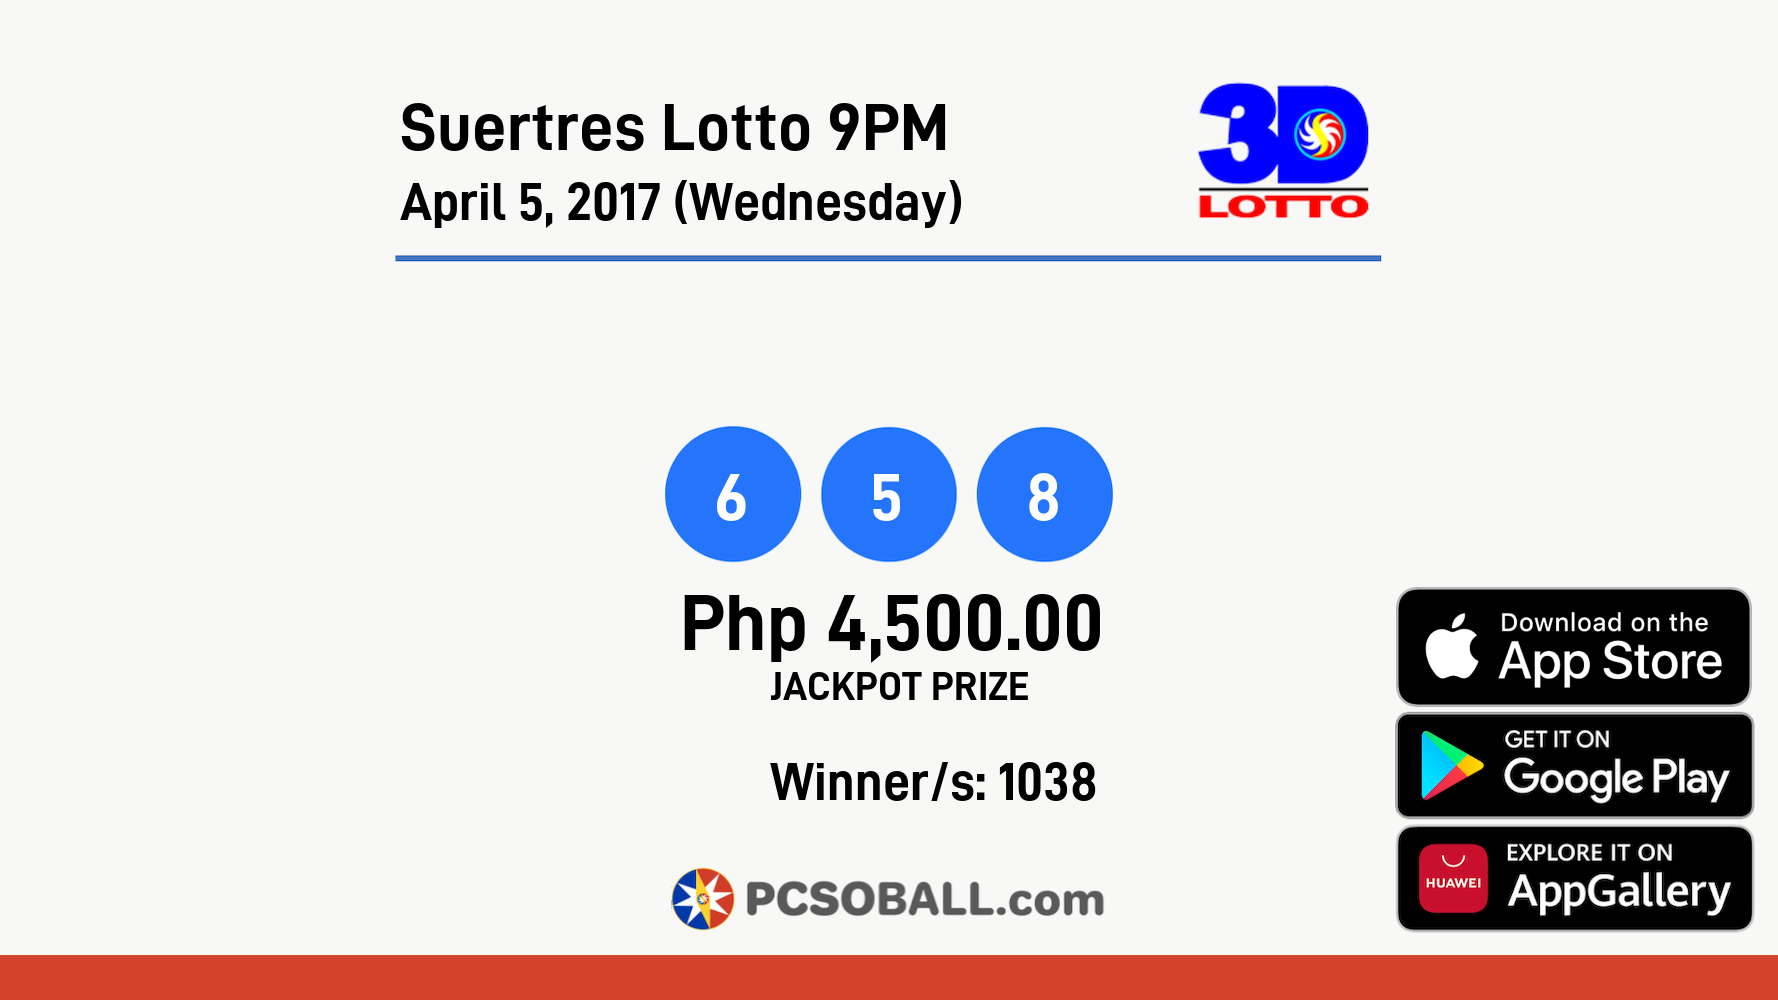 Suertres Lotto 9PM April 5, 2017 (Wednesday) Result